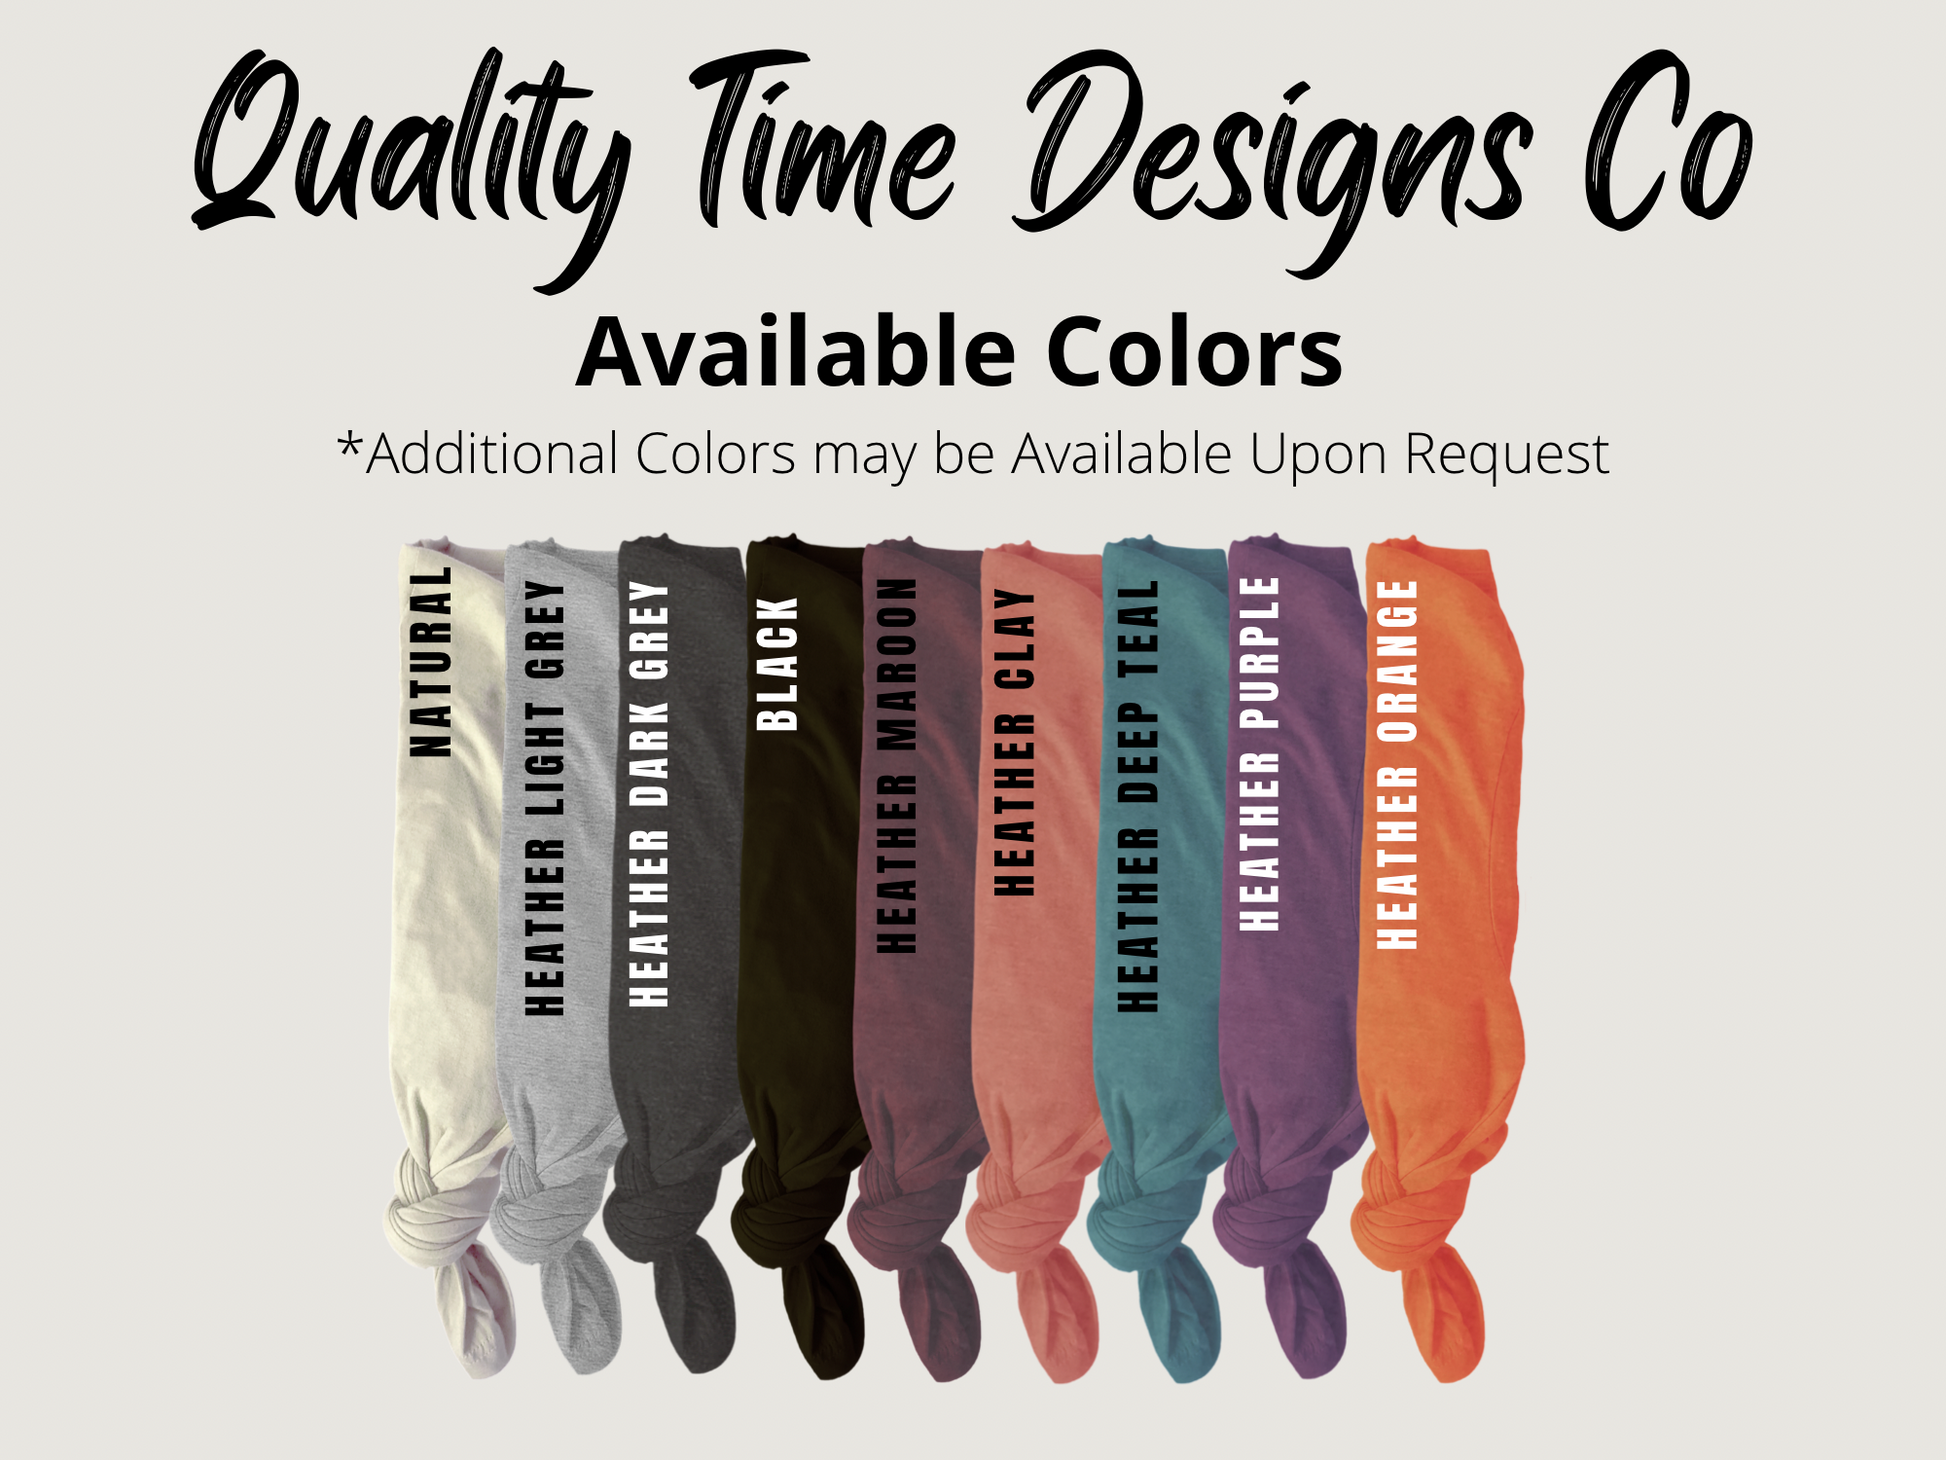 Quality Time Designs Co color chart